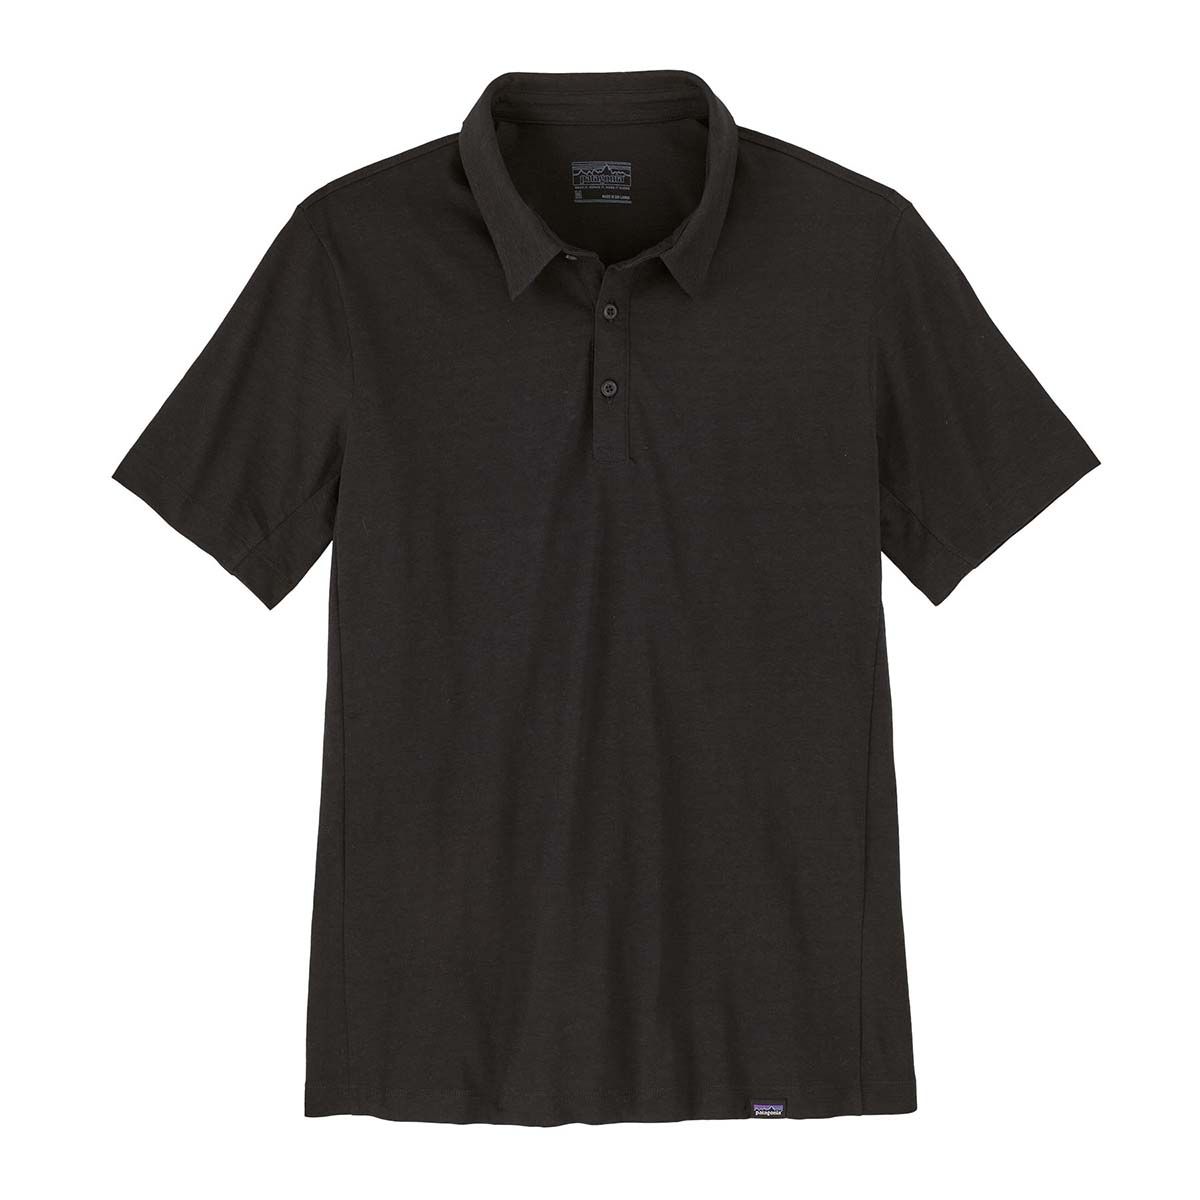 Patagonia Men's Essential SS Polo